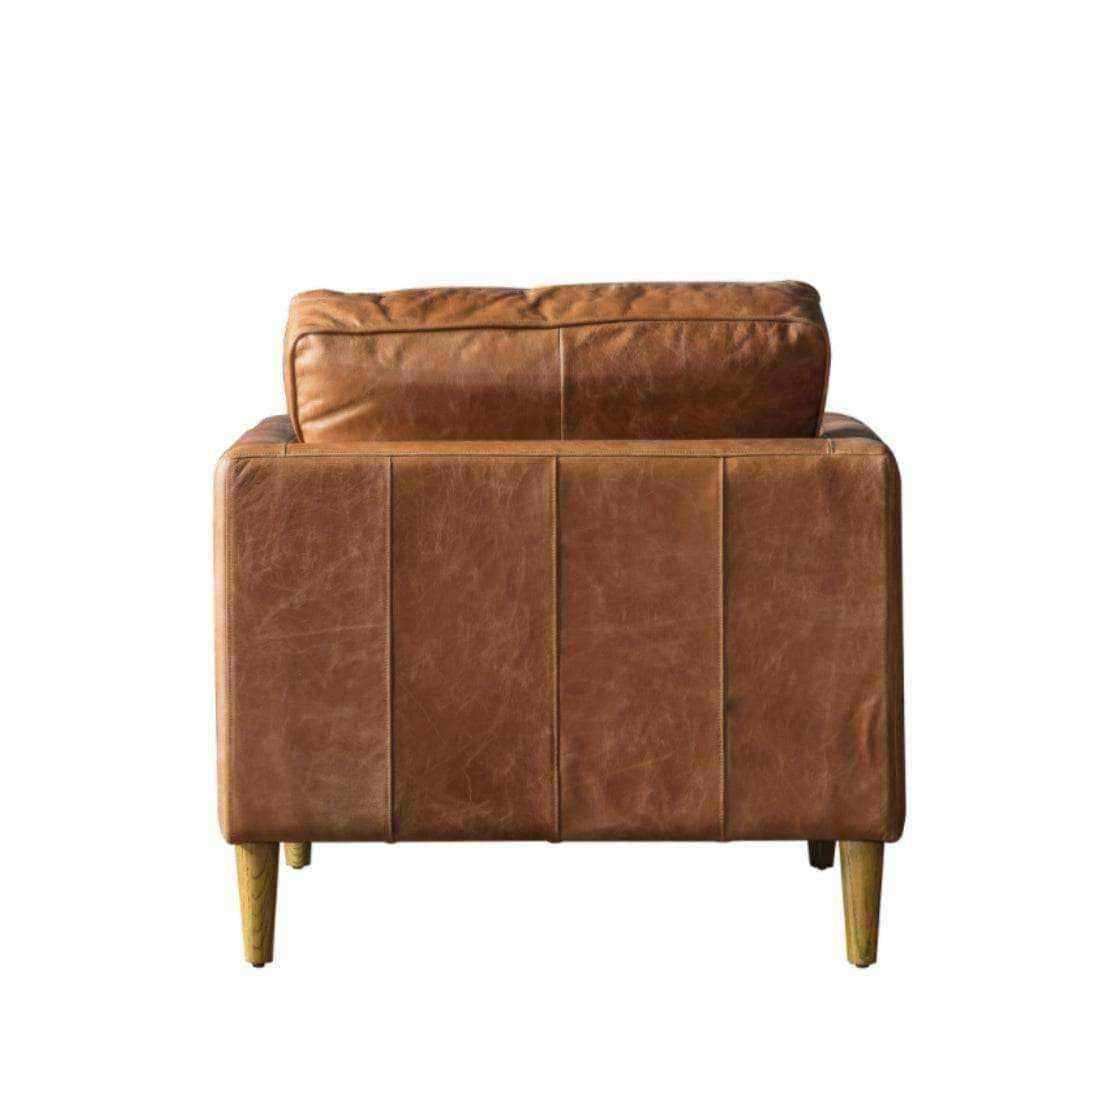 Stylish Vintage Brown Leather Armchair - The Farthing